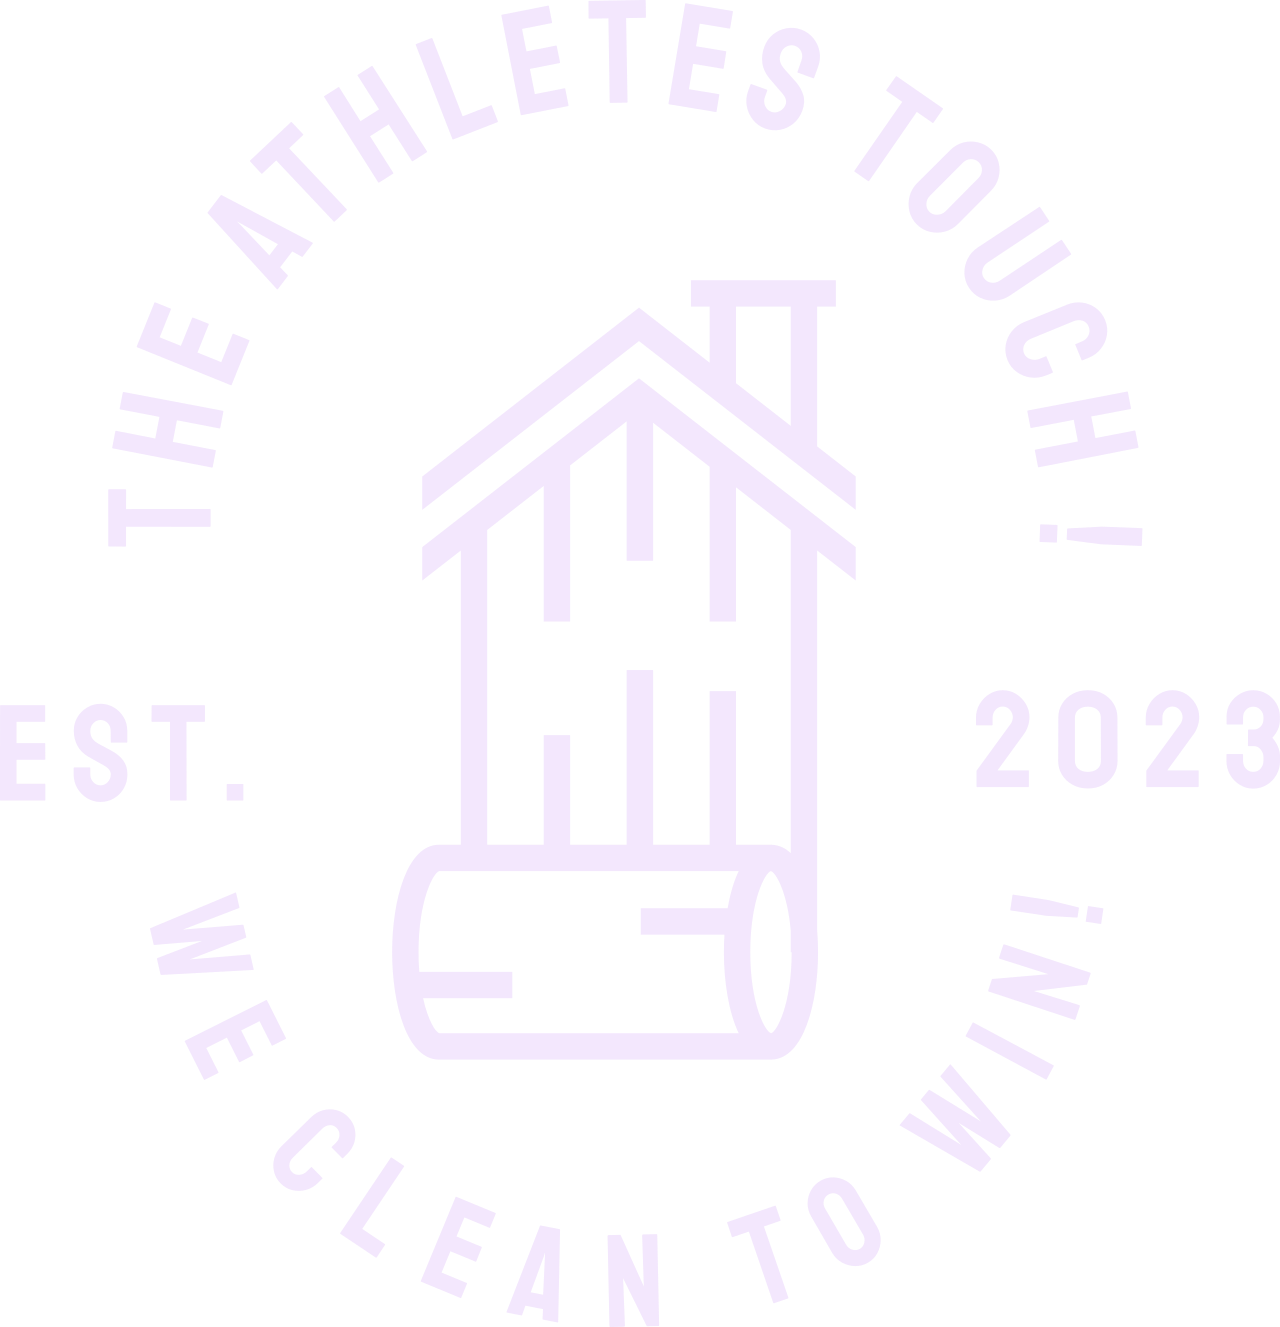 The Athletes Touch !'s logo